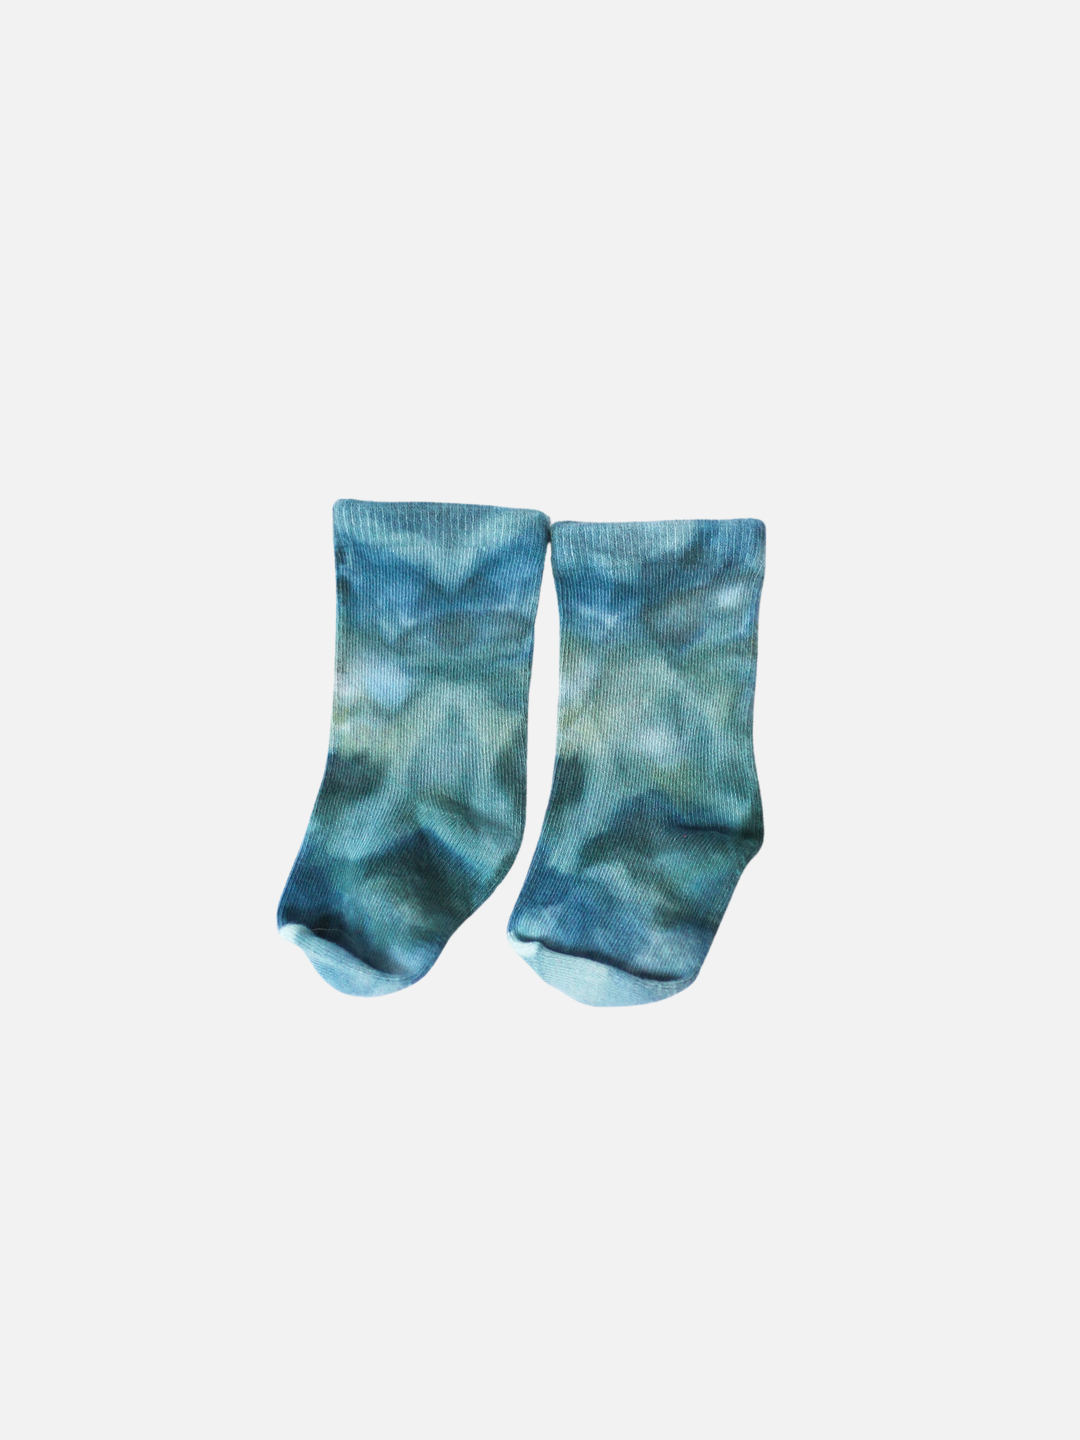 Pair of baby ankle socks in dappled shades of blue and green